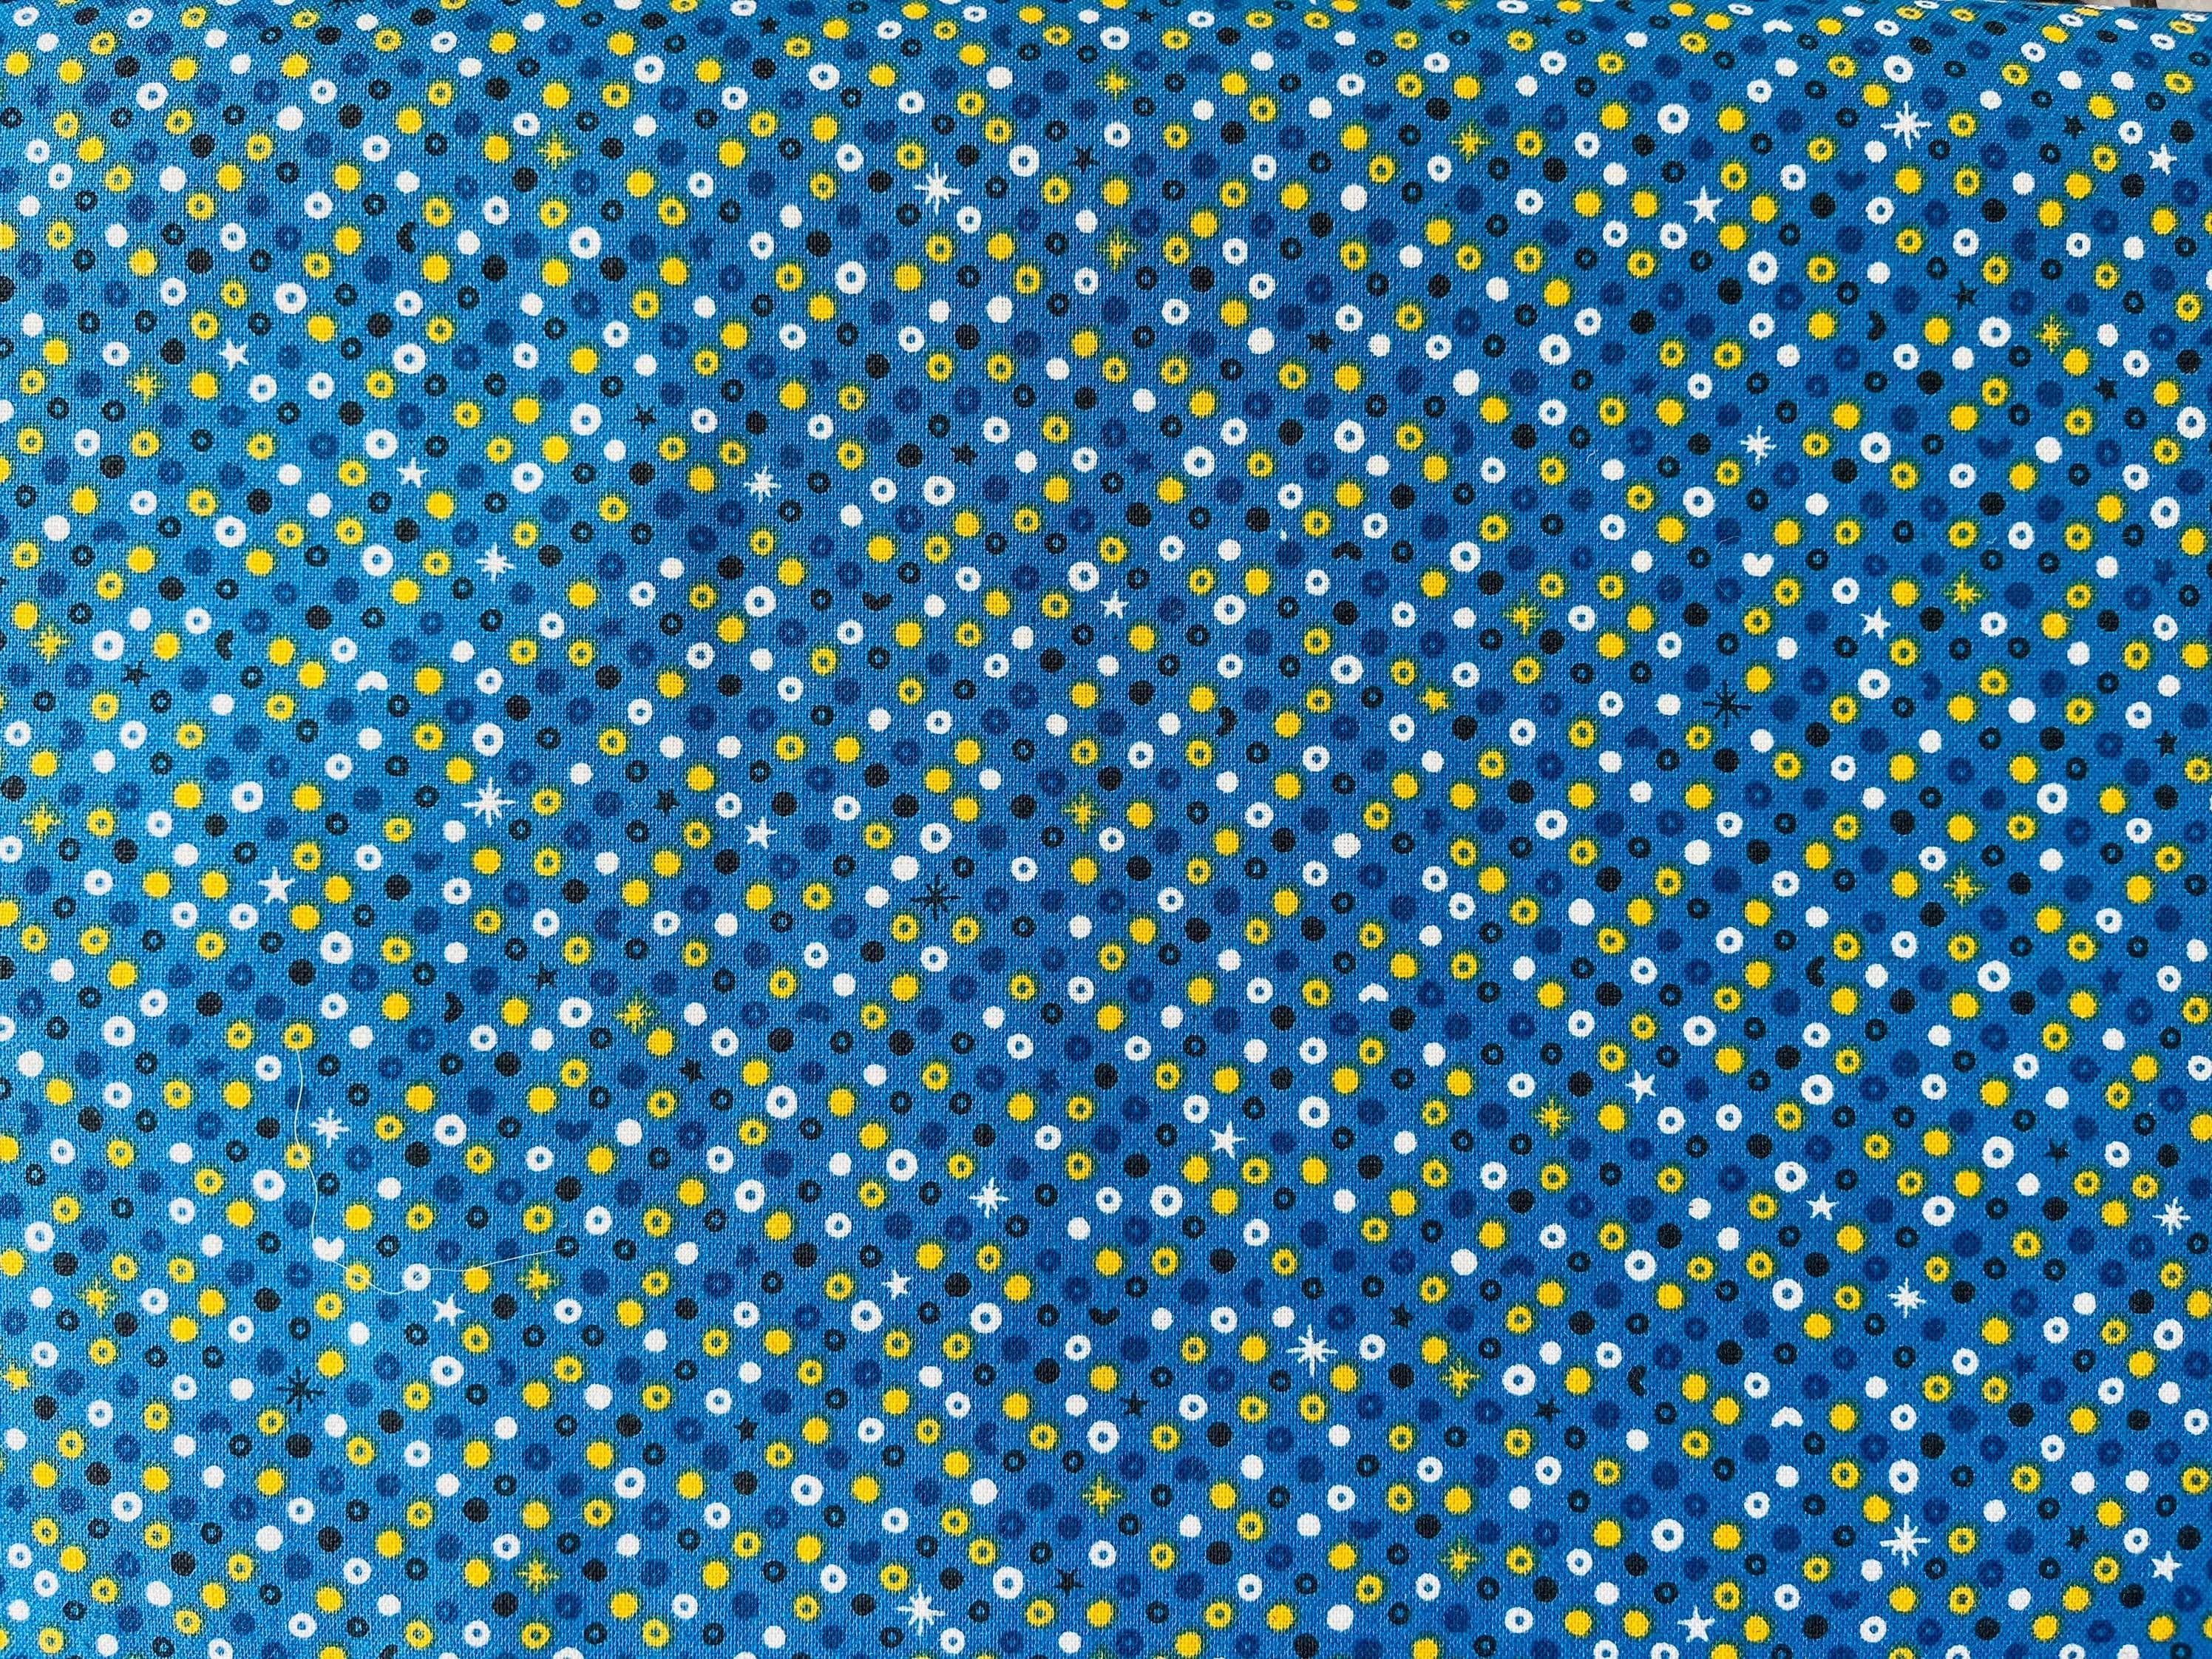 Waku Waku Christmas - Blue Sequins Unbleached Fabric  - Blue - White  - Yellow - Cotton+ Steel - Quilting Cotton Fabric - NM204-BL3U